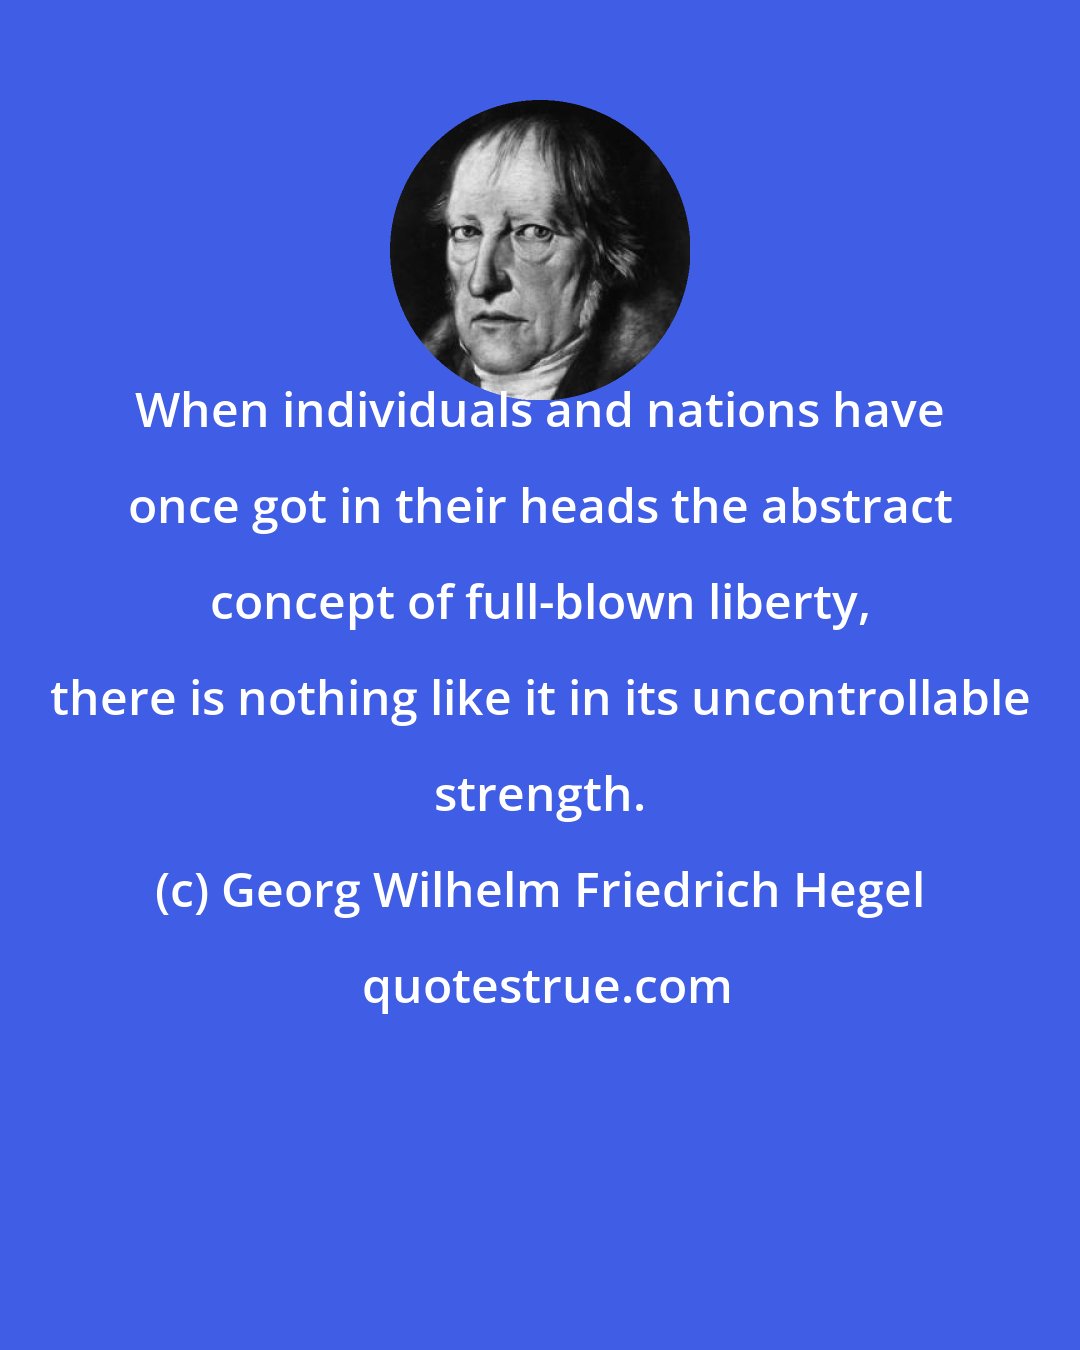 Georg Wilhelm Friedrich Hegel: When individuals and nations have once got in their heads the abstract concept of full-blown liberty, there is nothing like it in its uncontrollable strength.